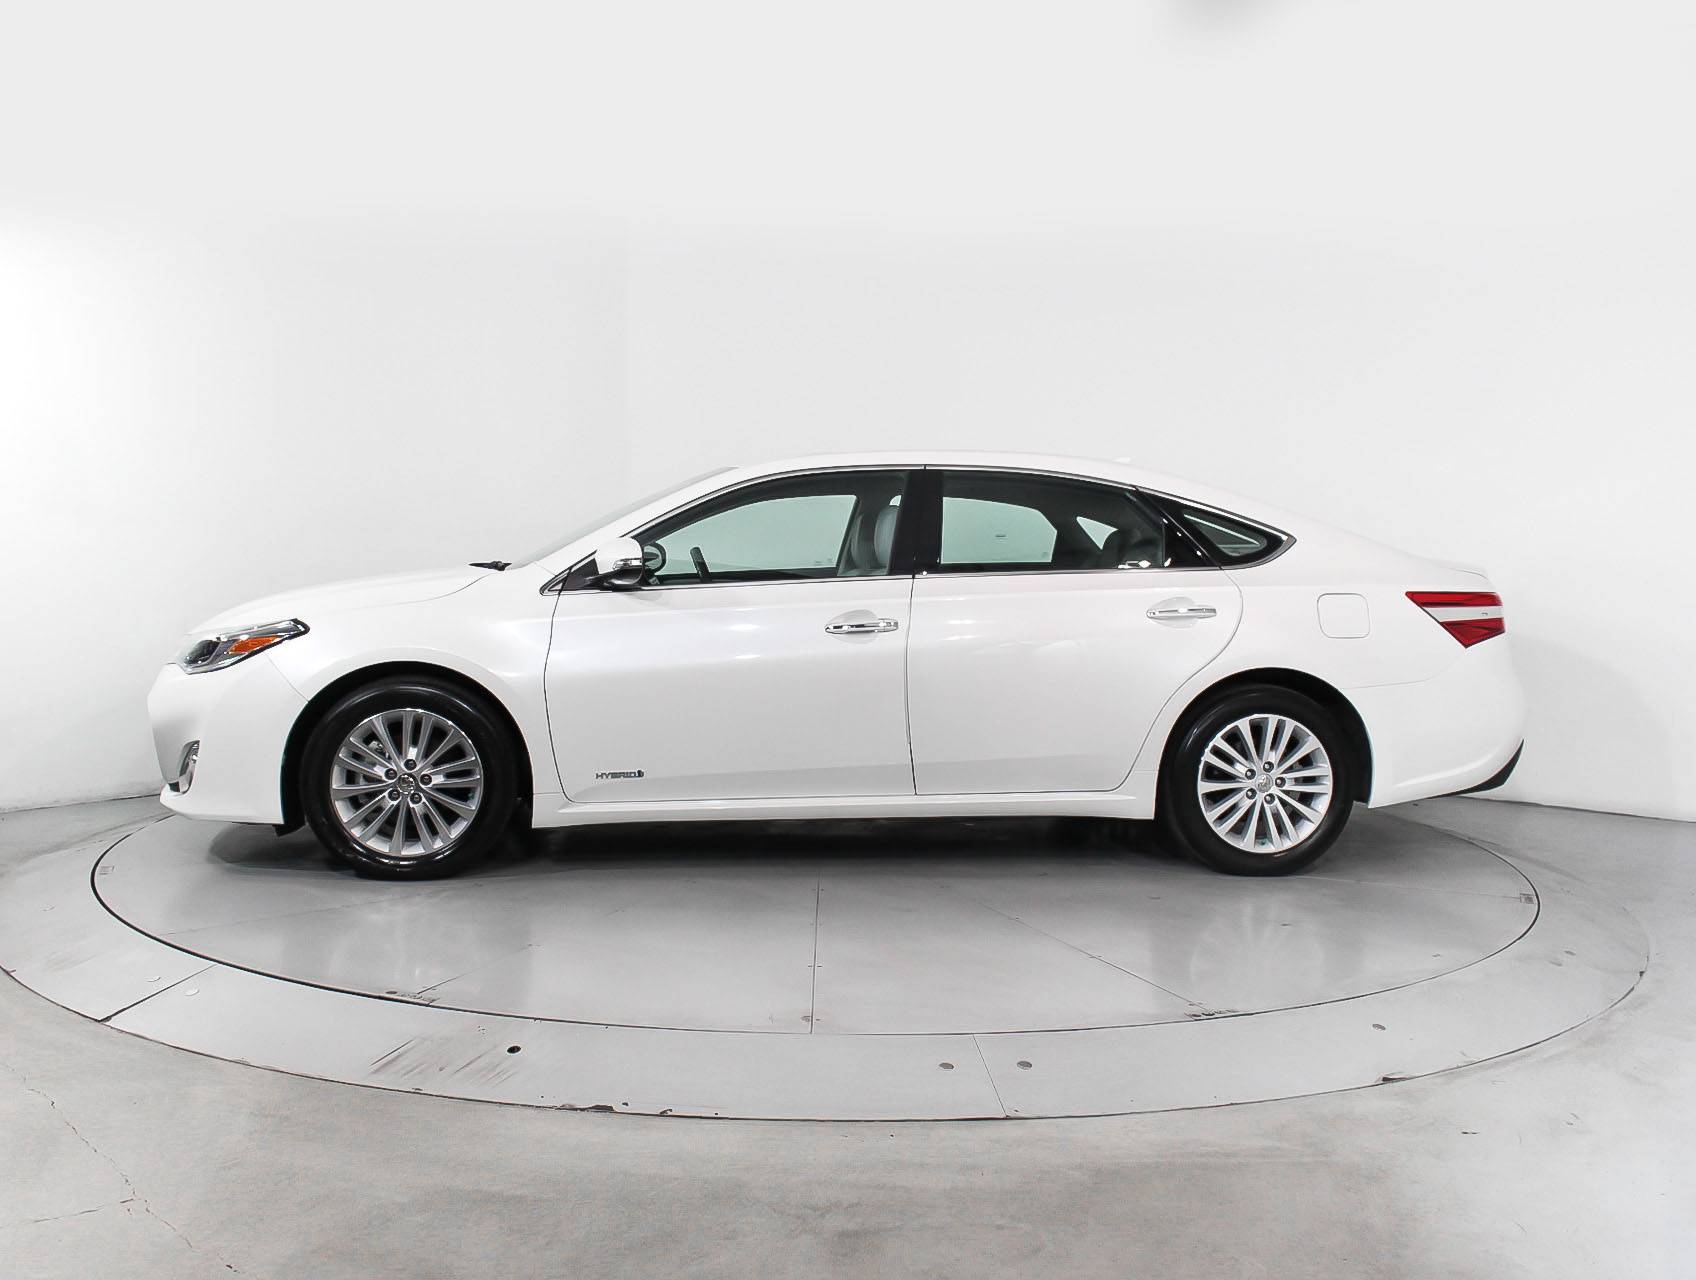 Used 2014 TOYOTA AVALON HYBRID Limited for sale in MIAMI | 91116